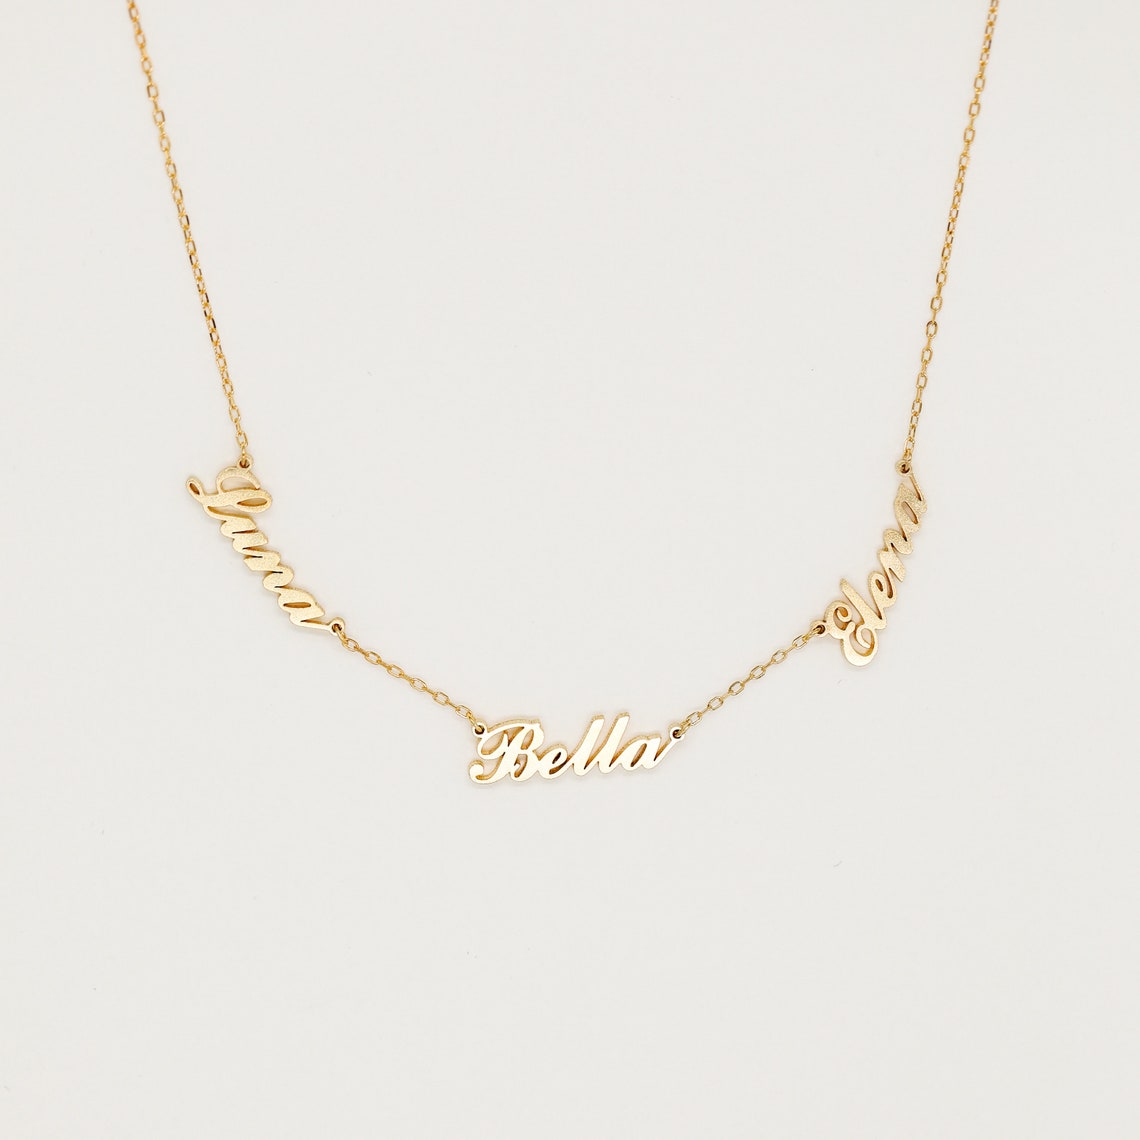 Perfect Gift for Mom • Family Name Necklace in Gold, Silver, Rose • Children Names Necklace • Mothers Necklace • Personalized Gift